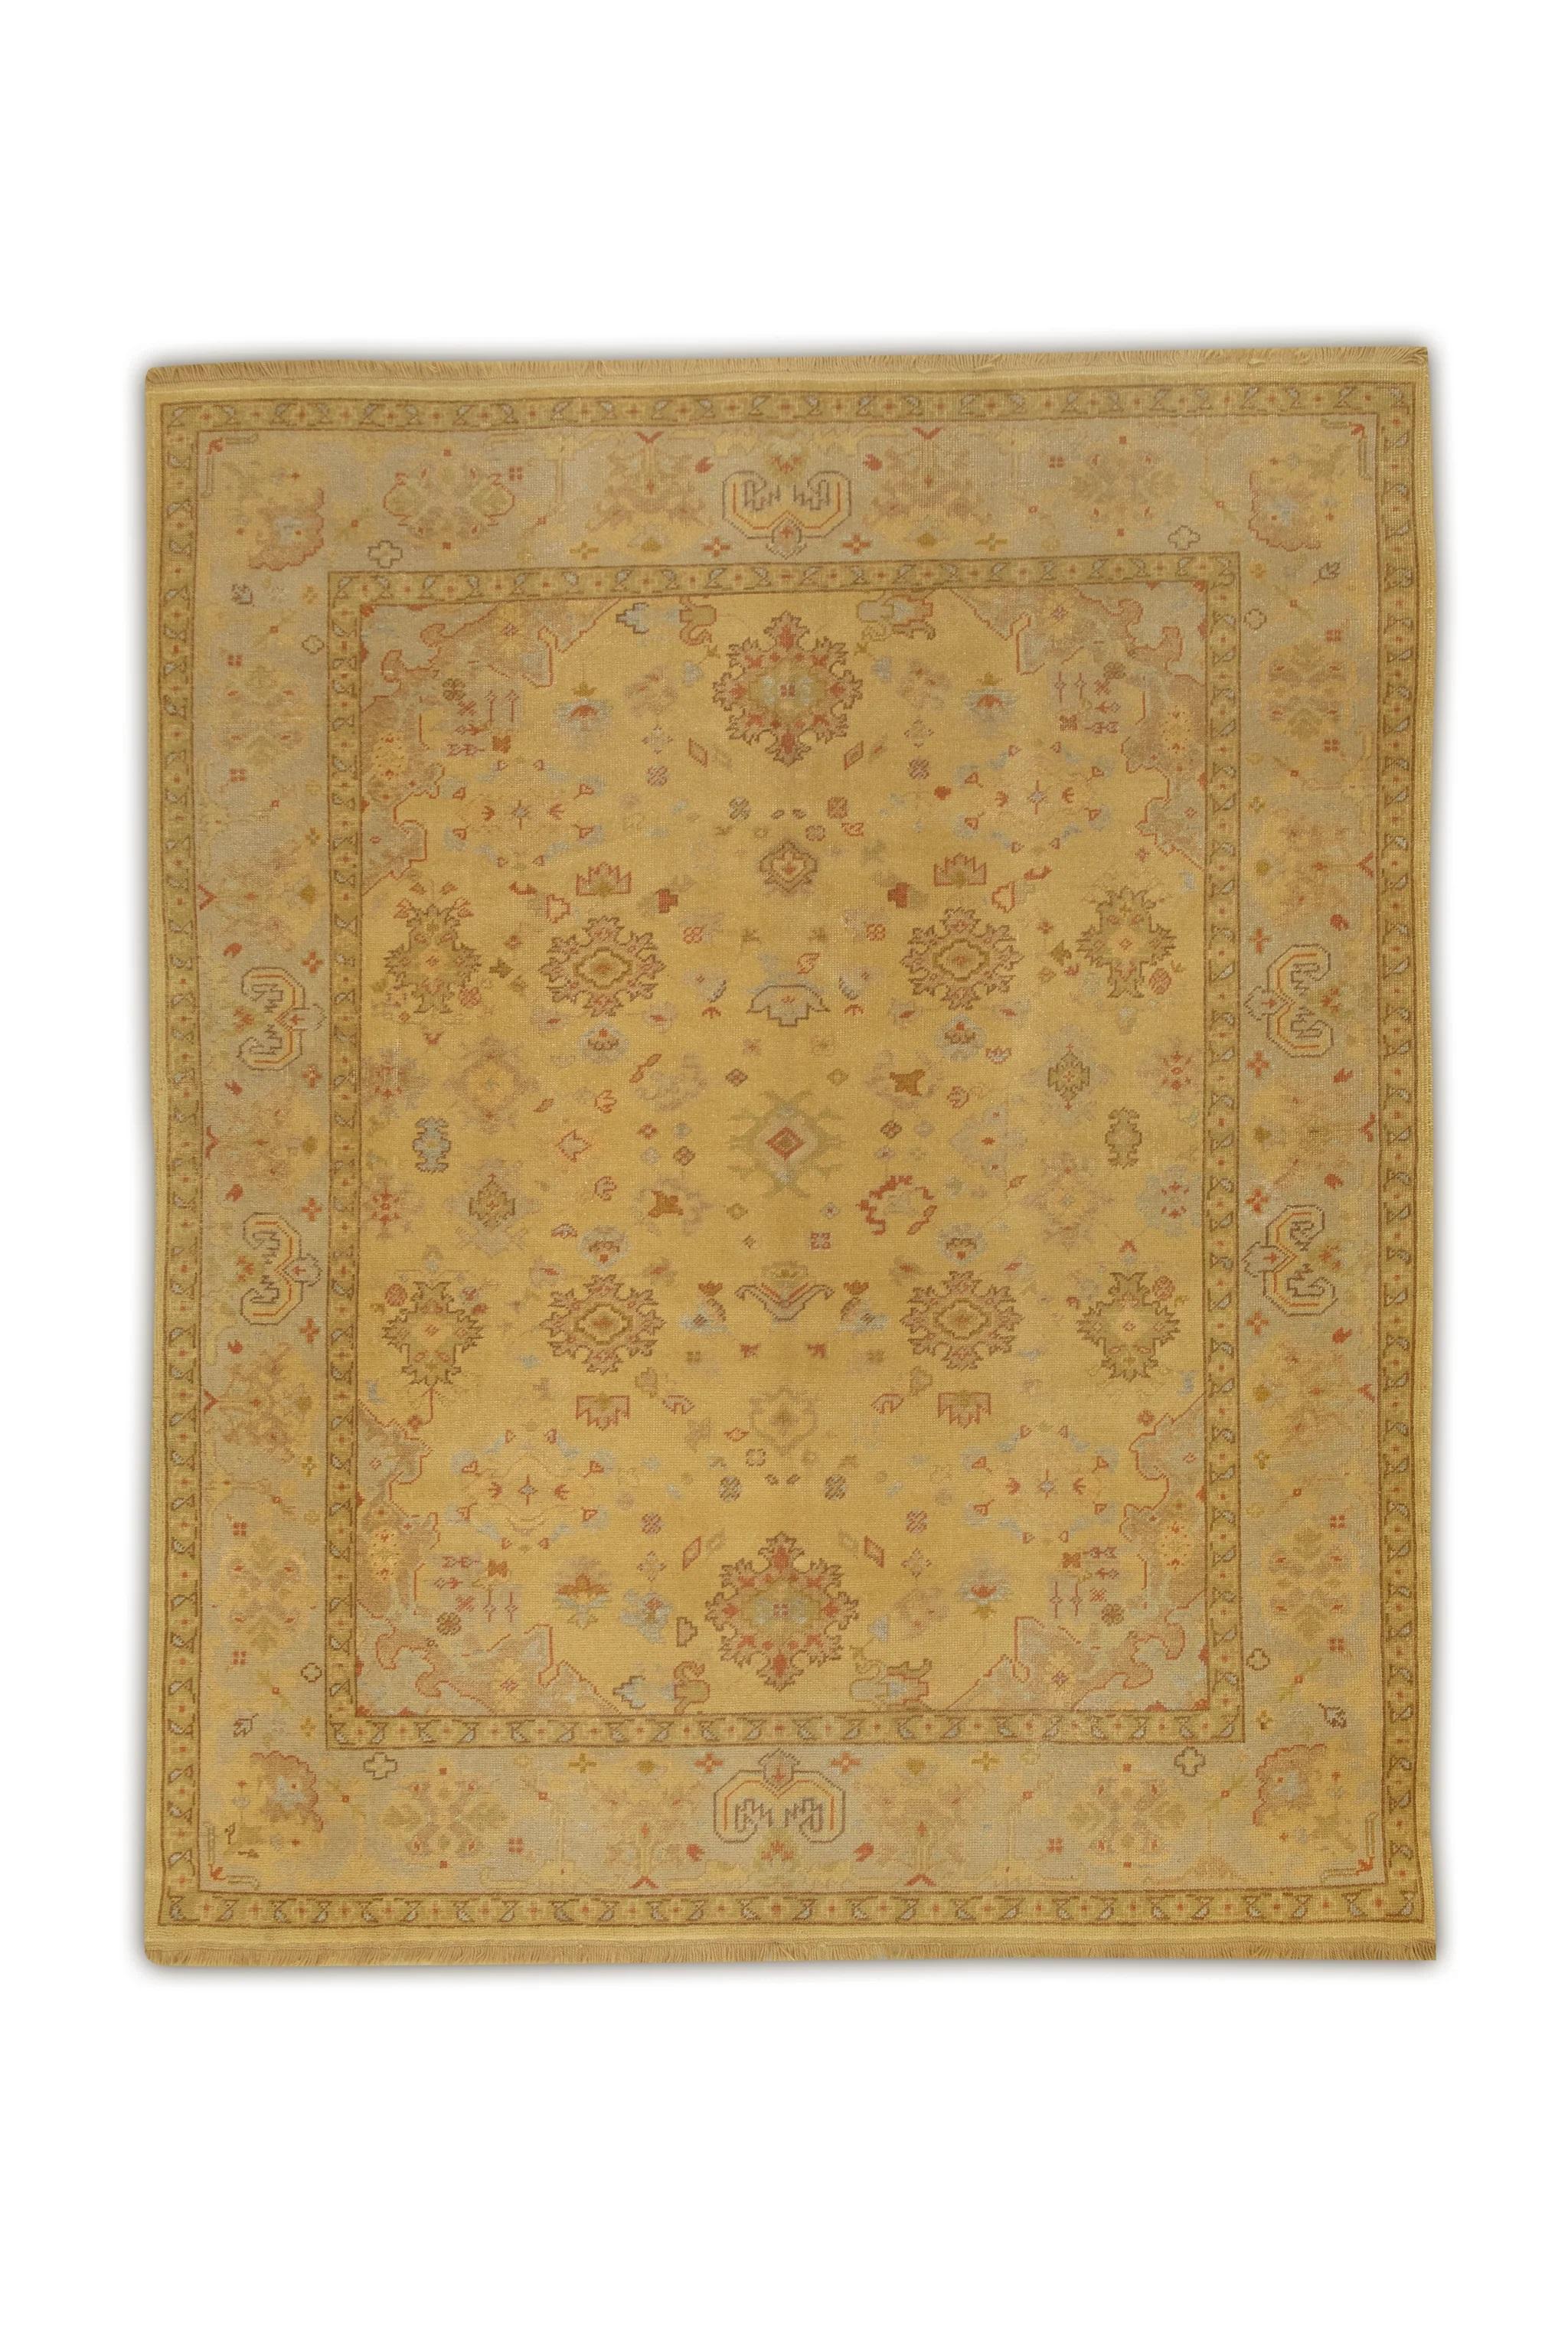 Yellow & Red Floral Design Handwoven Wool Turkish Oushak Rug 8' x 9'6